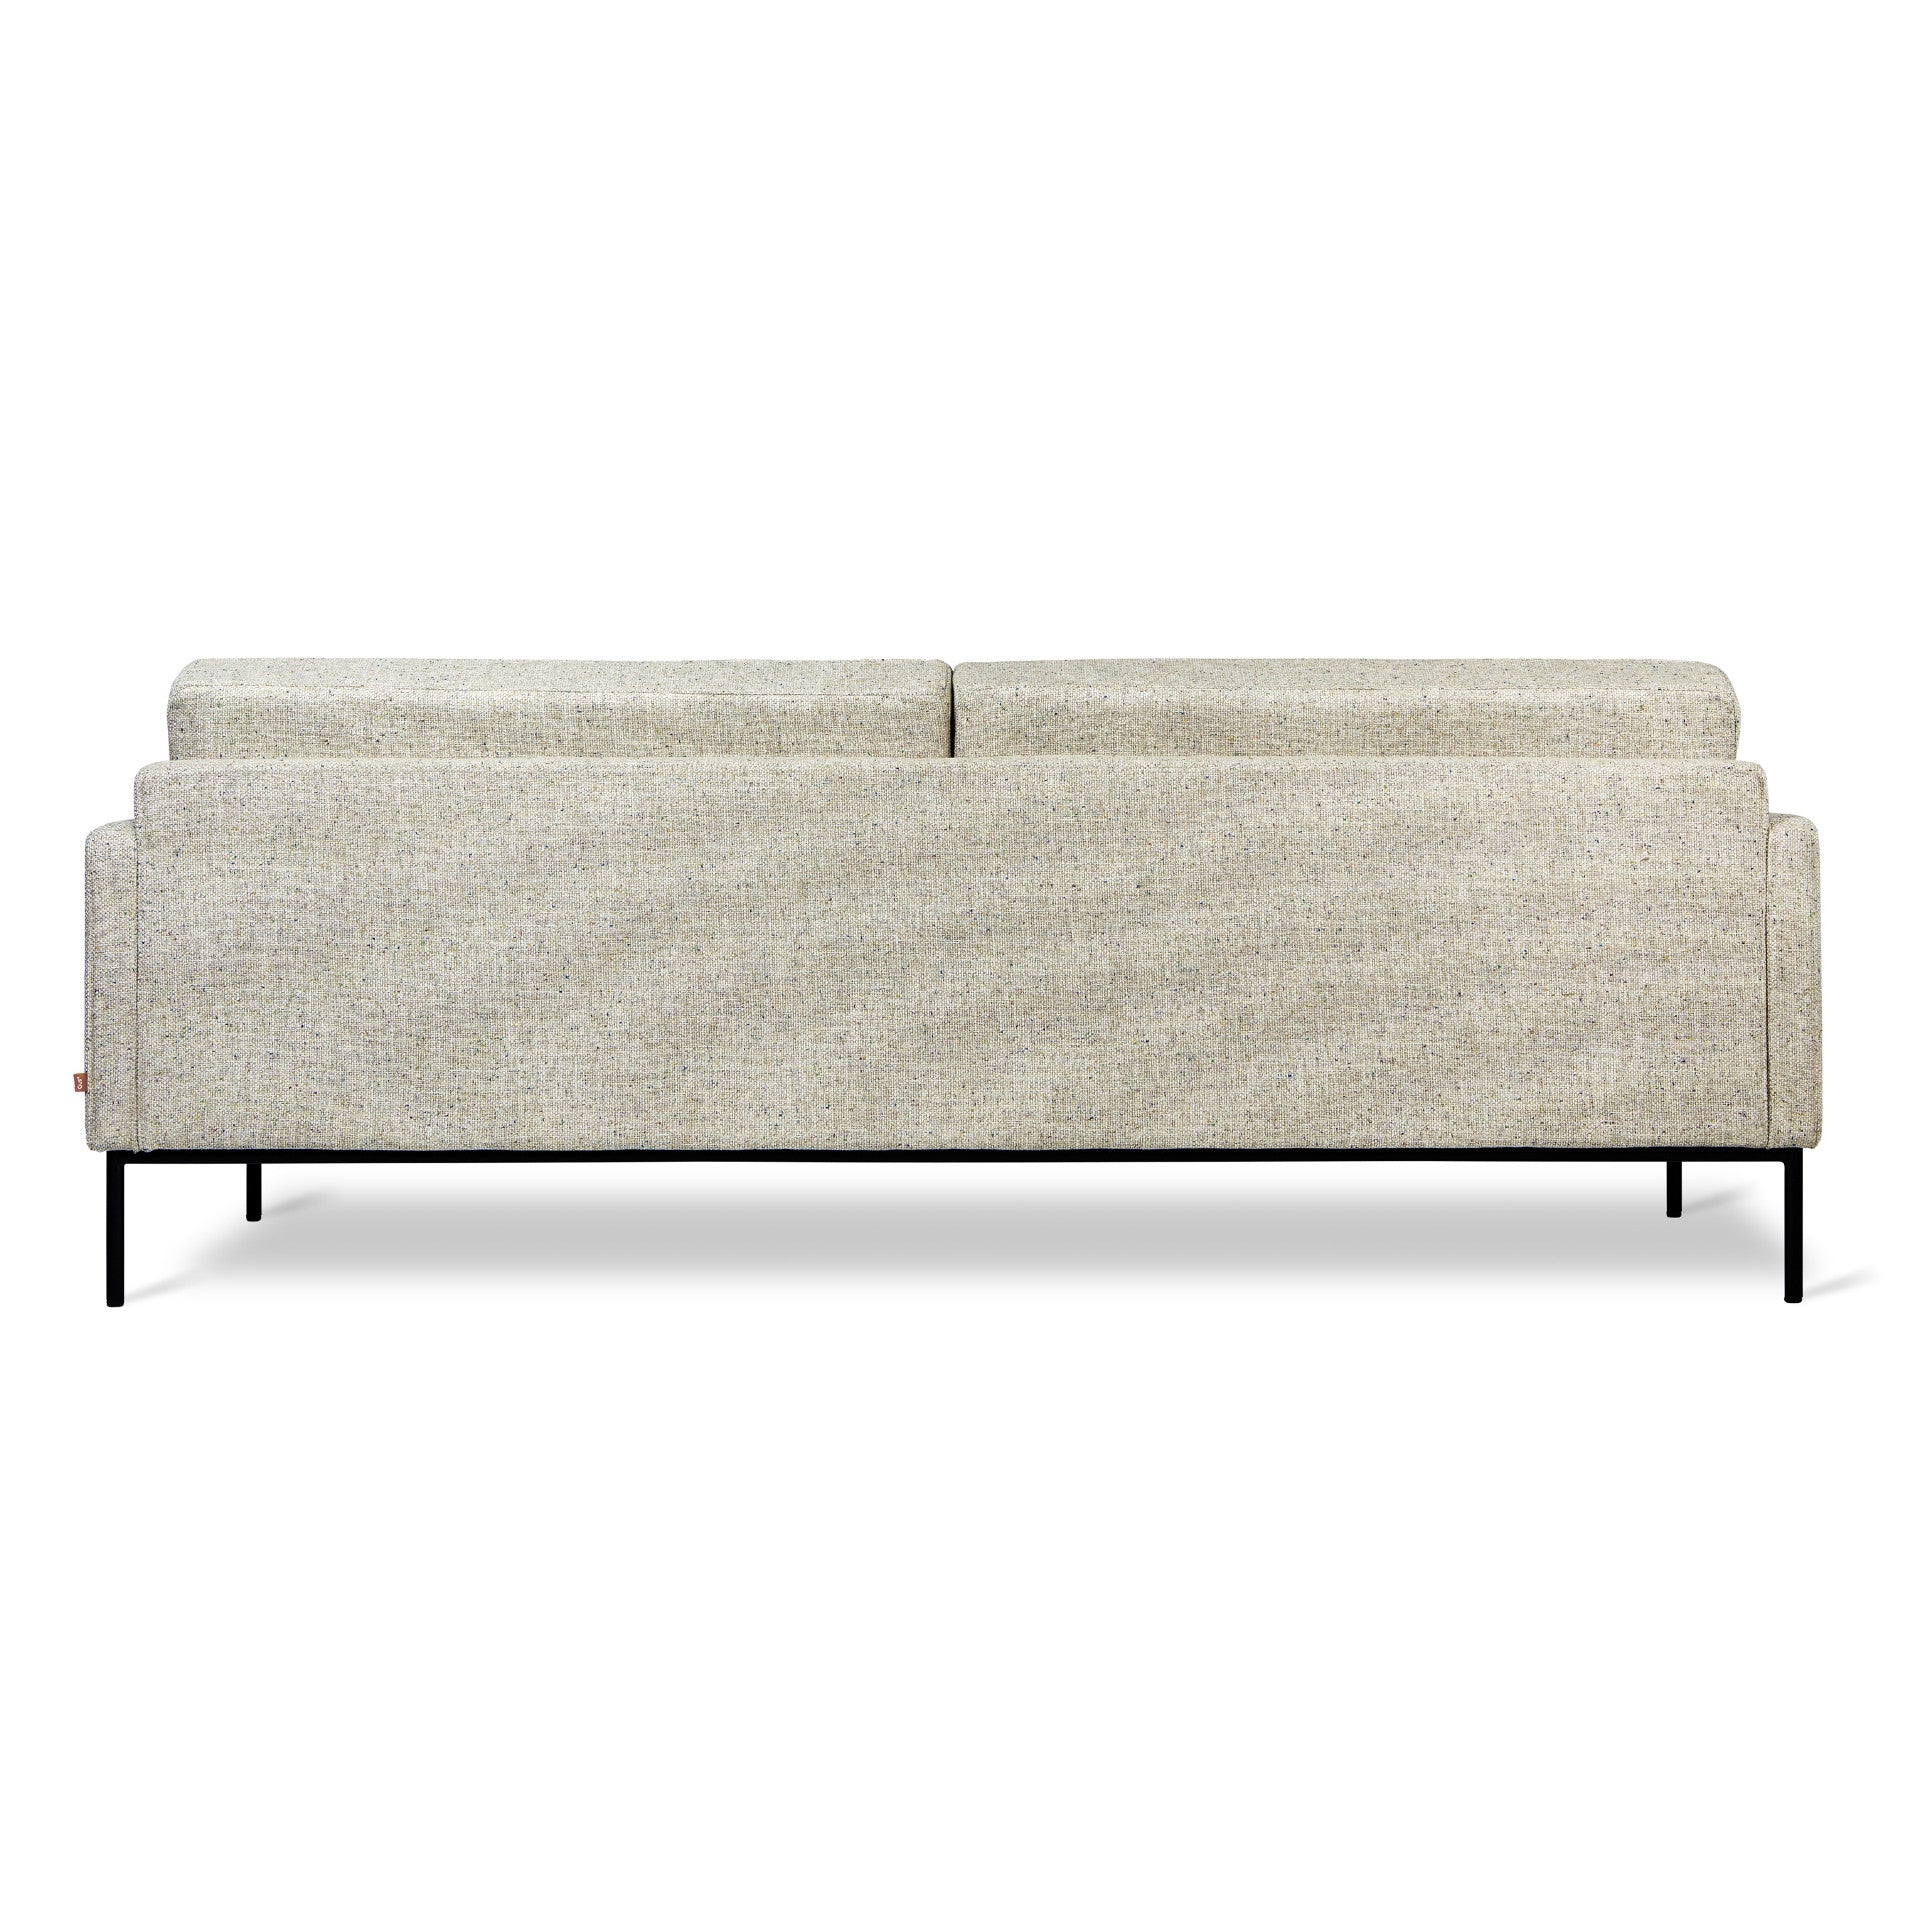 Back view of Funfetti Linen Town Sofa - DIGS